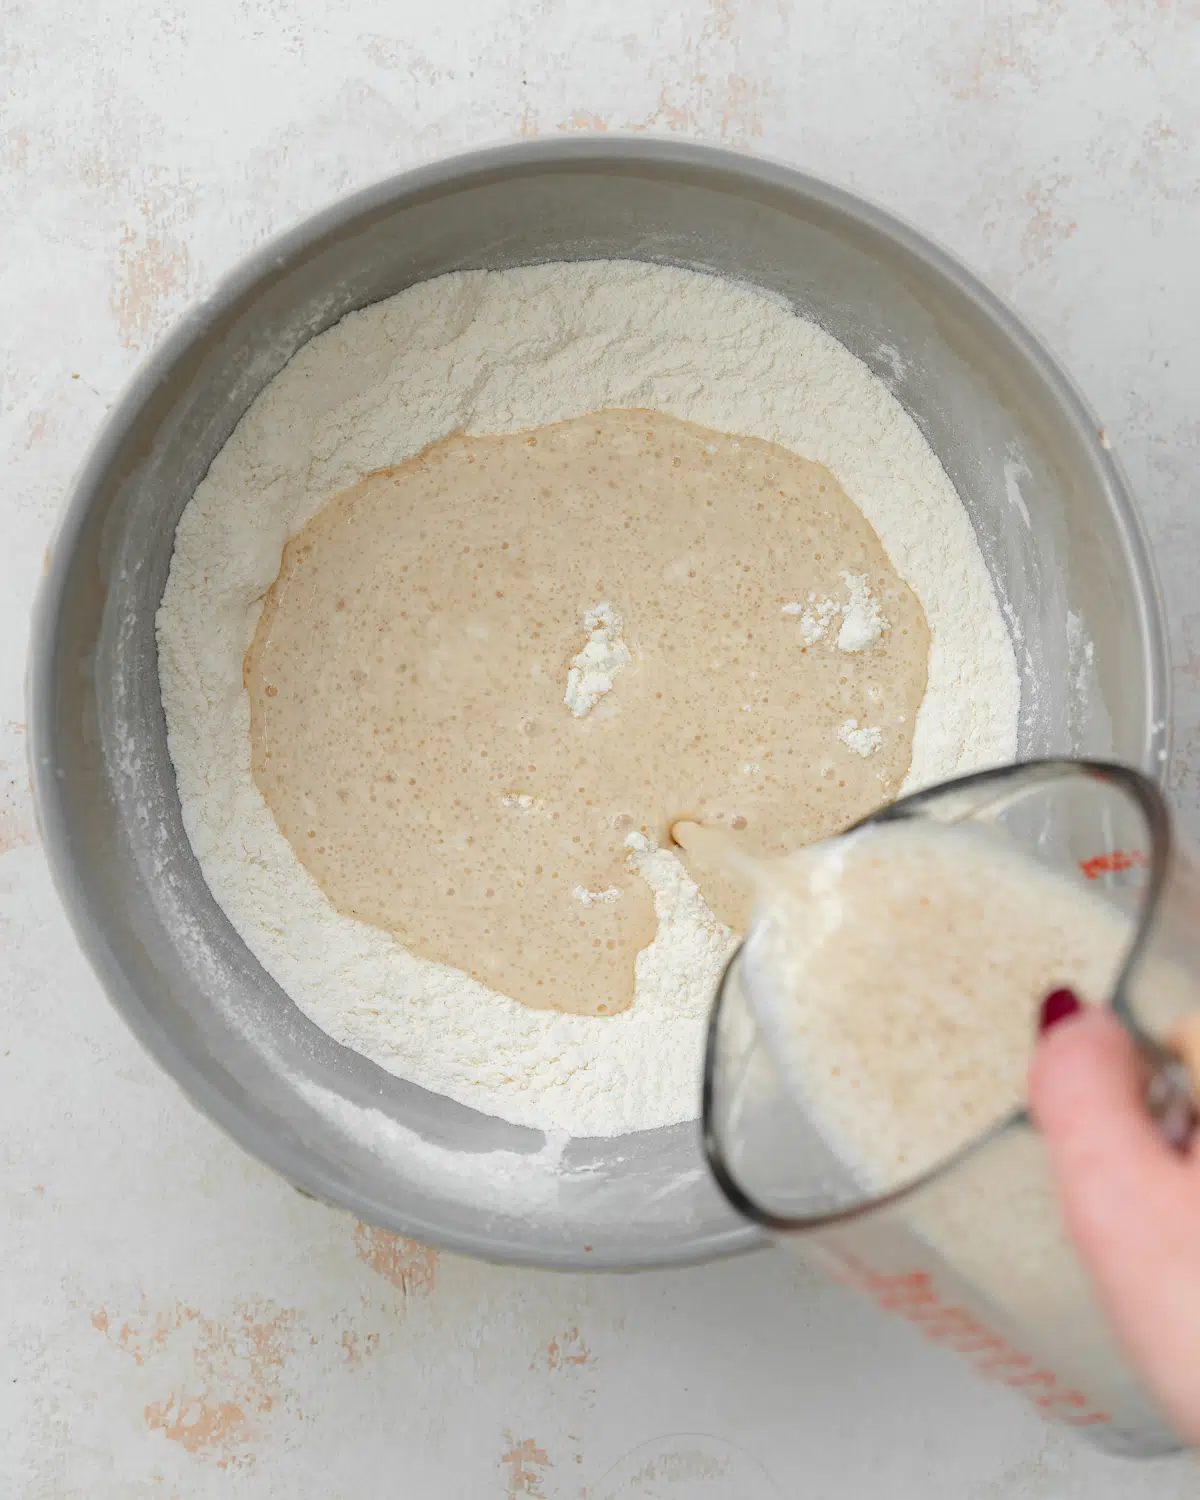 pouring milk into dry ingredients to make cupcakes.